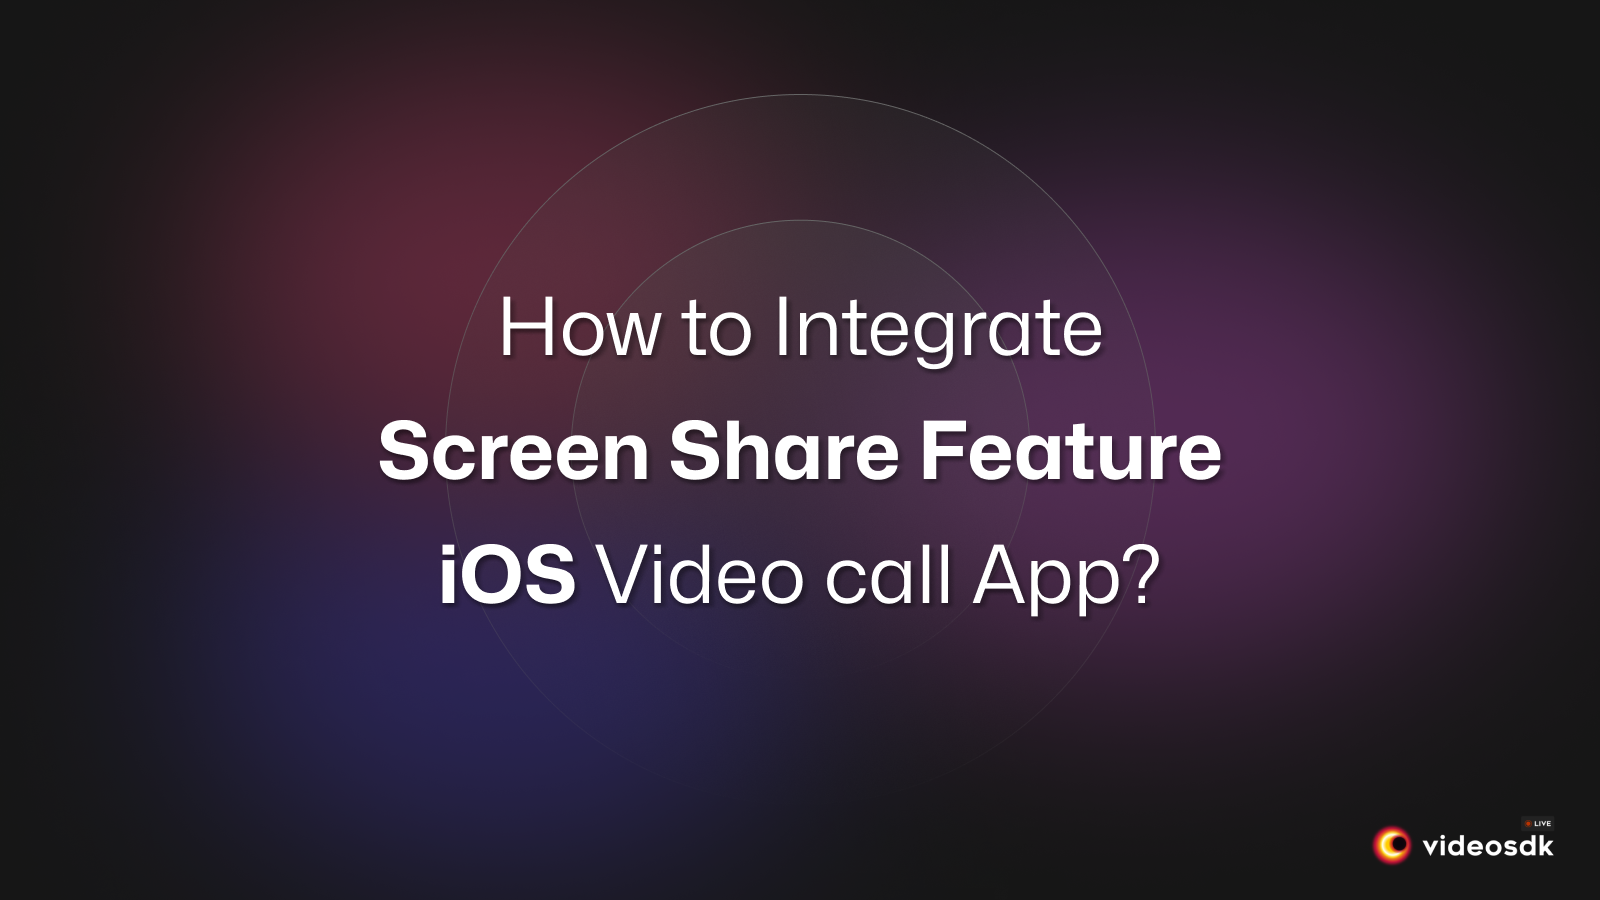 How to Integrate Screen Share in iOS Video Call App?